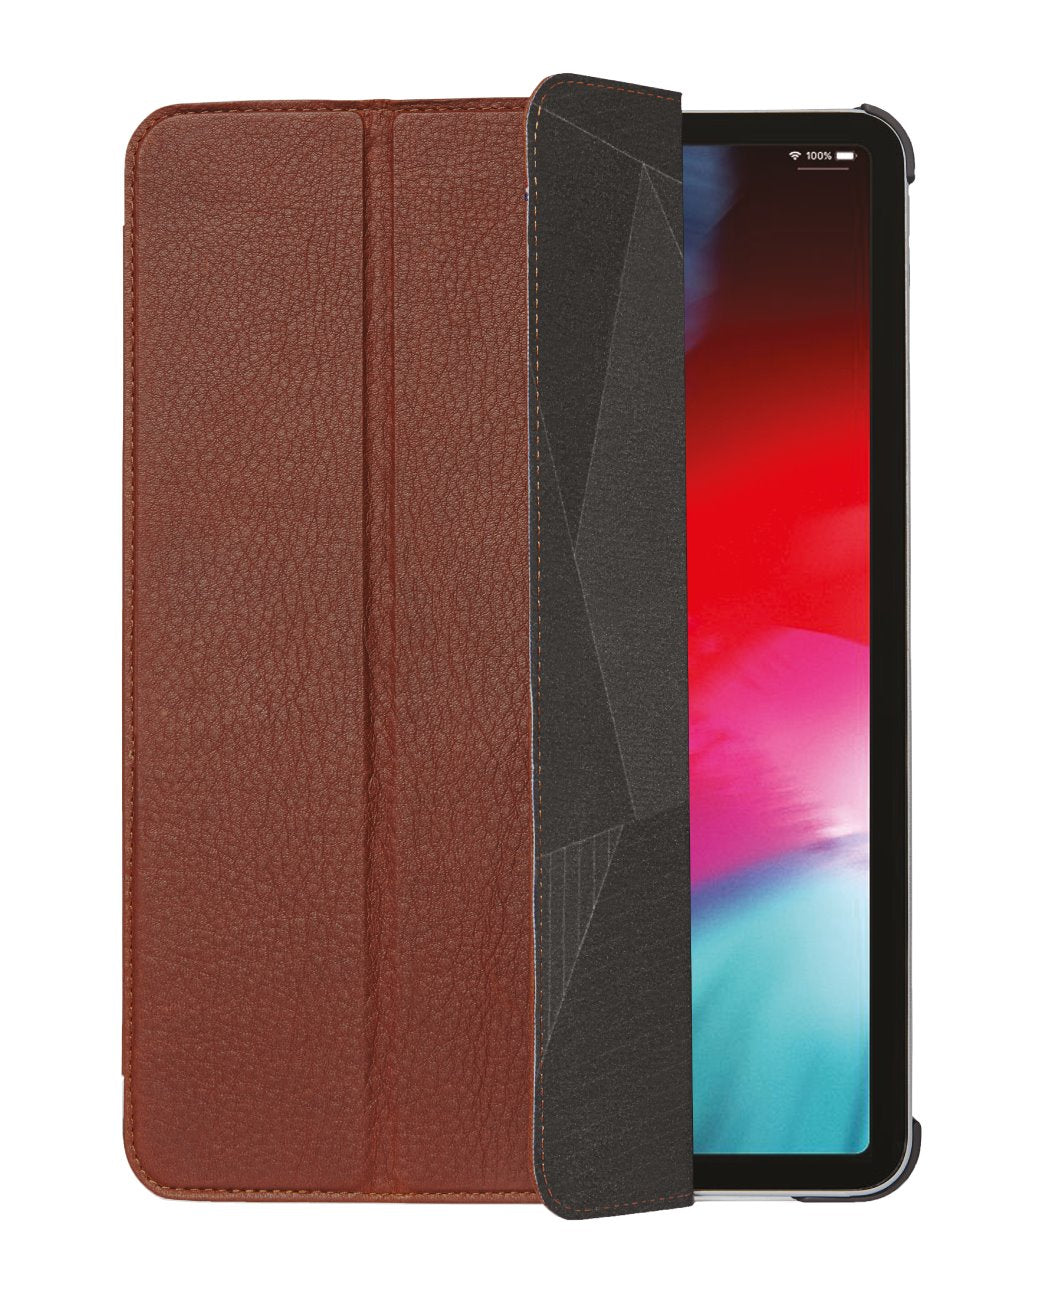 iPad Air 10.9 4th Gen (2020) Leather Slim Cover Brown